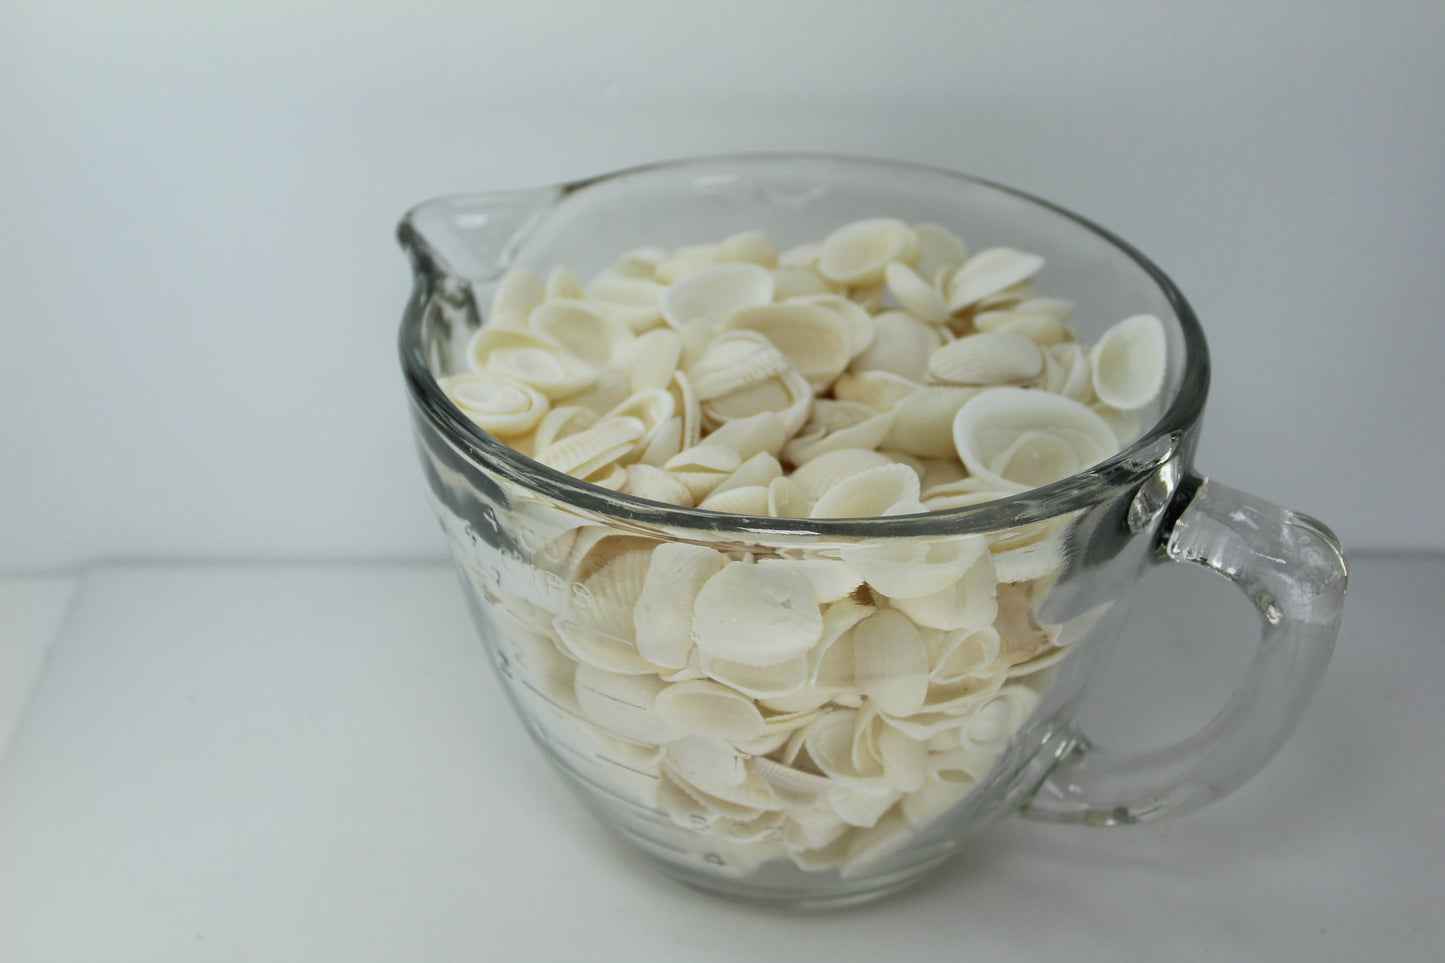 Florida Natural Shells Bulk 4 Cups White Arks Jewelry Shell Art Beach Wedding Party